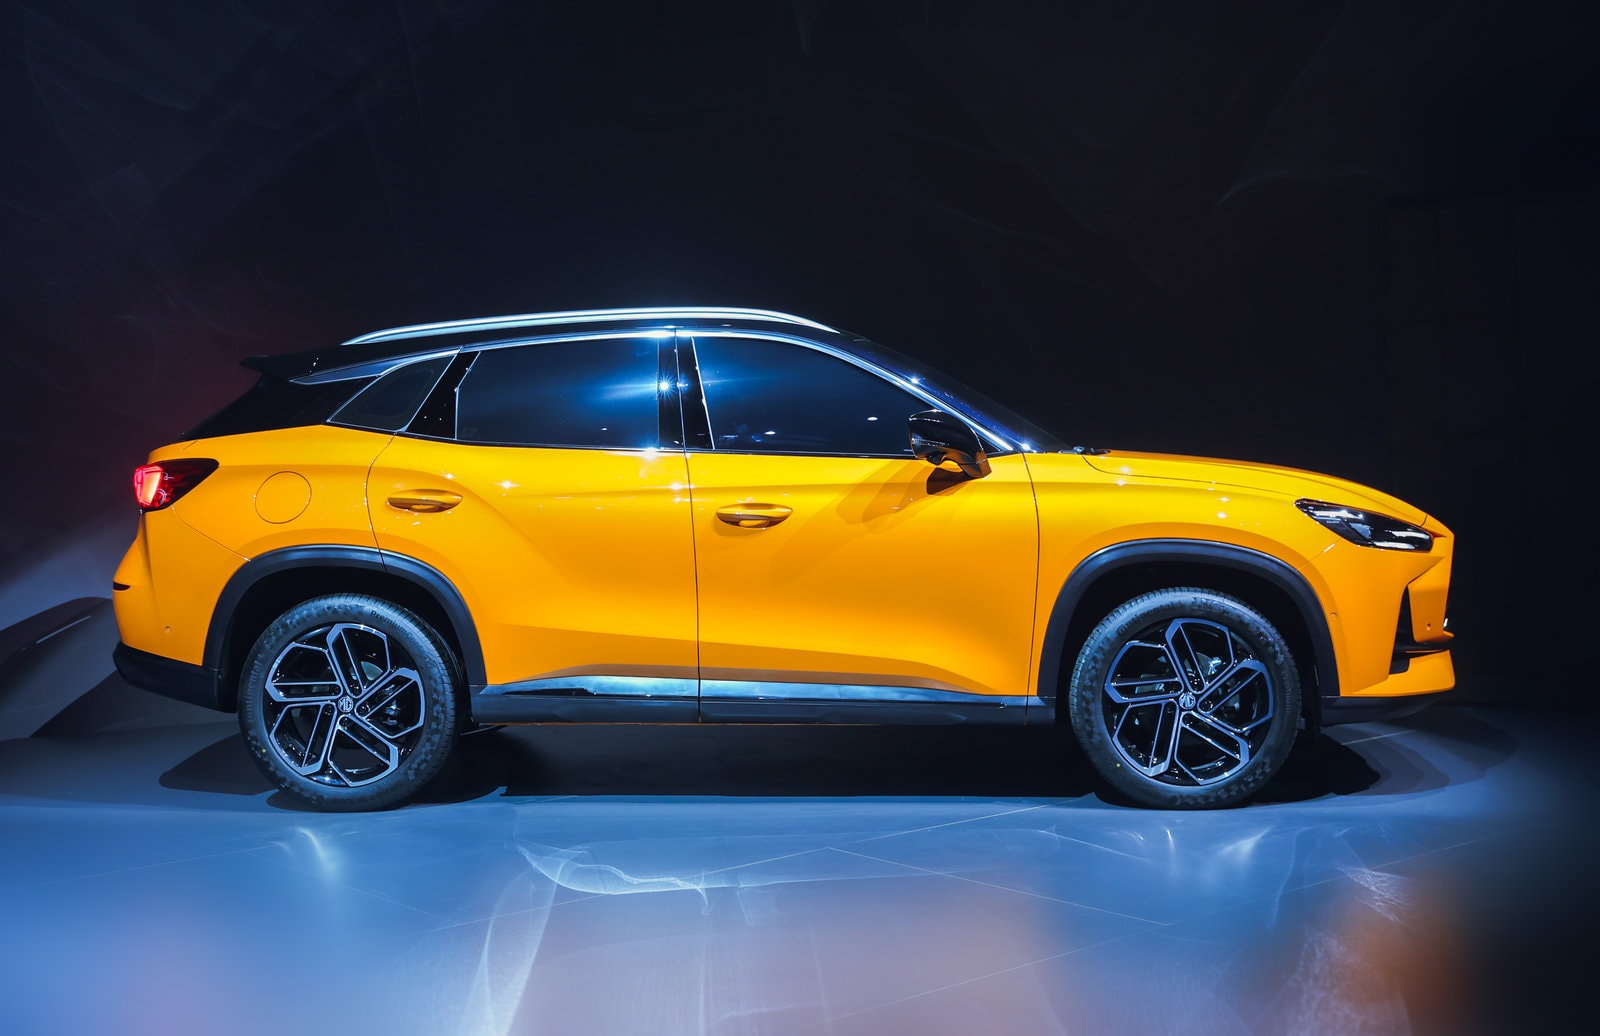 The side profile of MG One SUV.